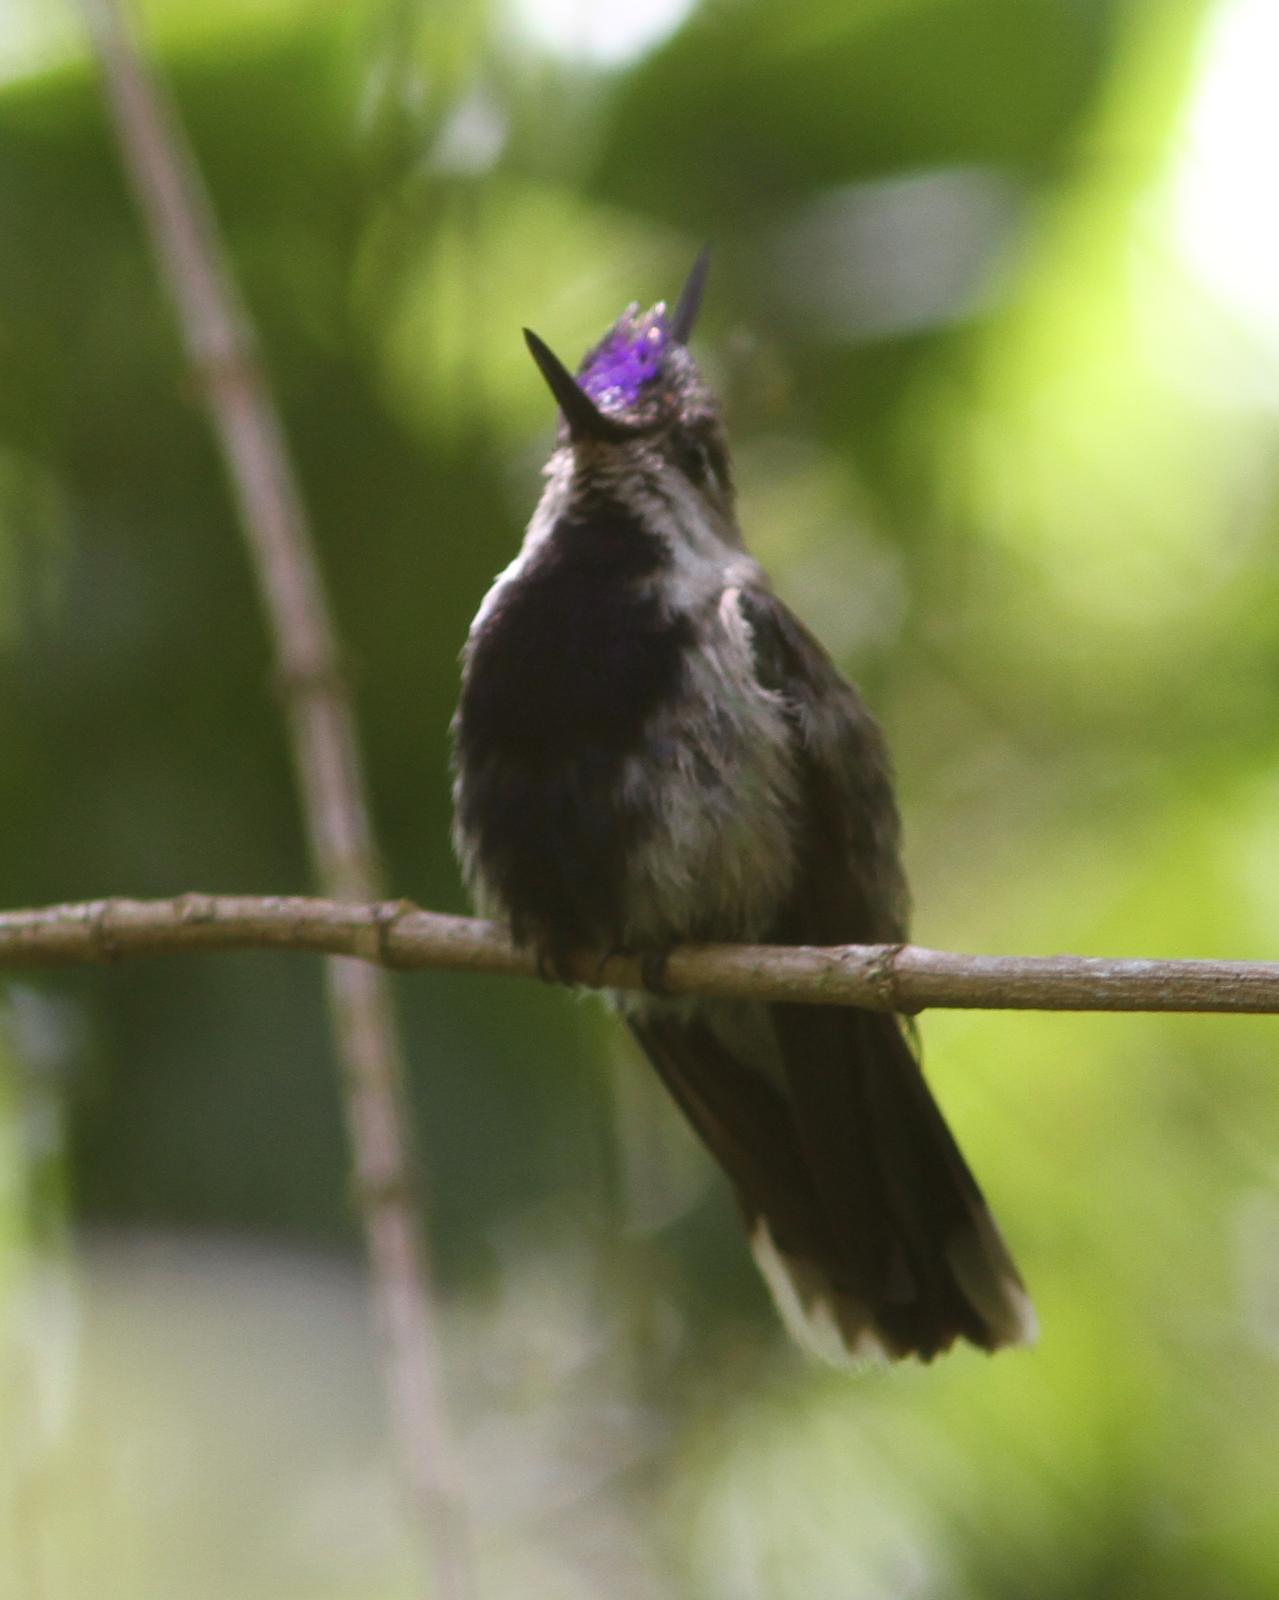 Purple-crowned Plovercrest Photo by Marcelo Padua